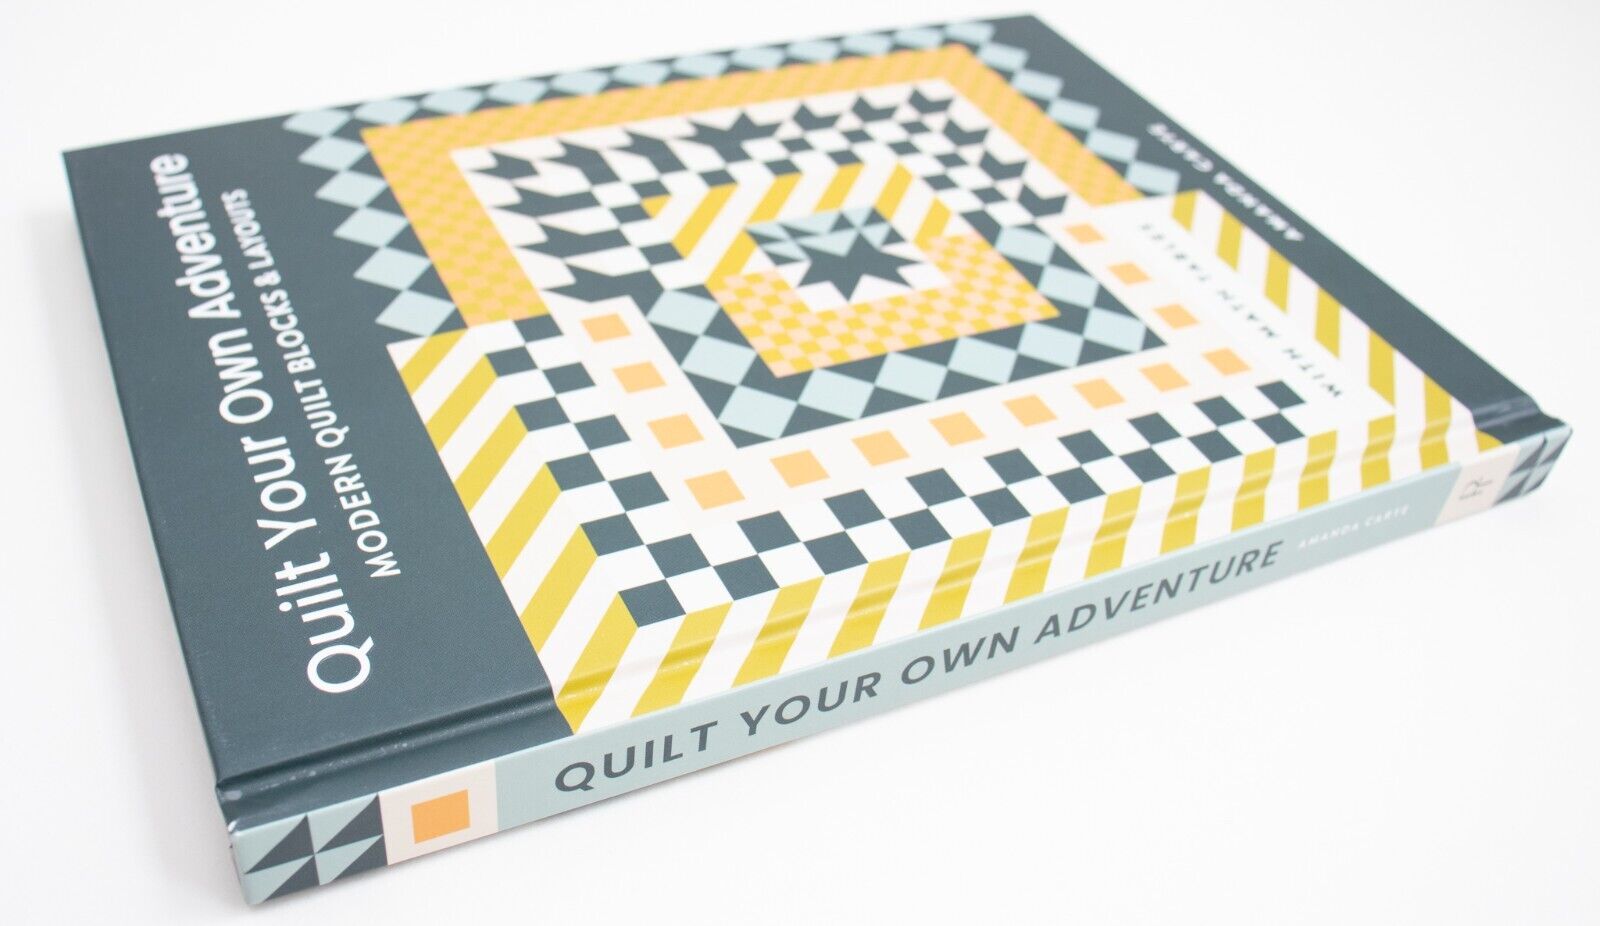 Quilting Adventures by Amanda Carye: 9781958803769 |  : Books